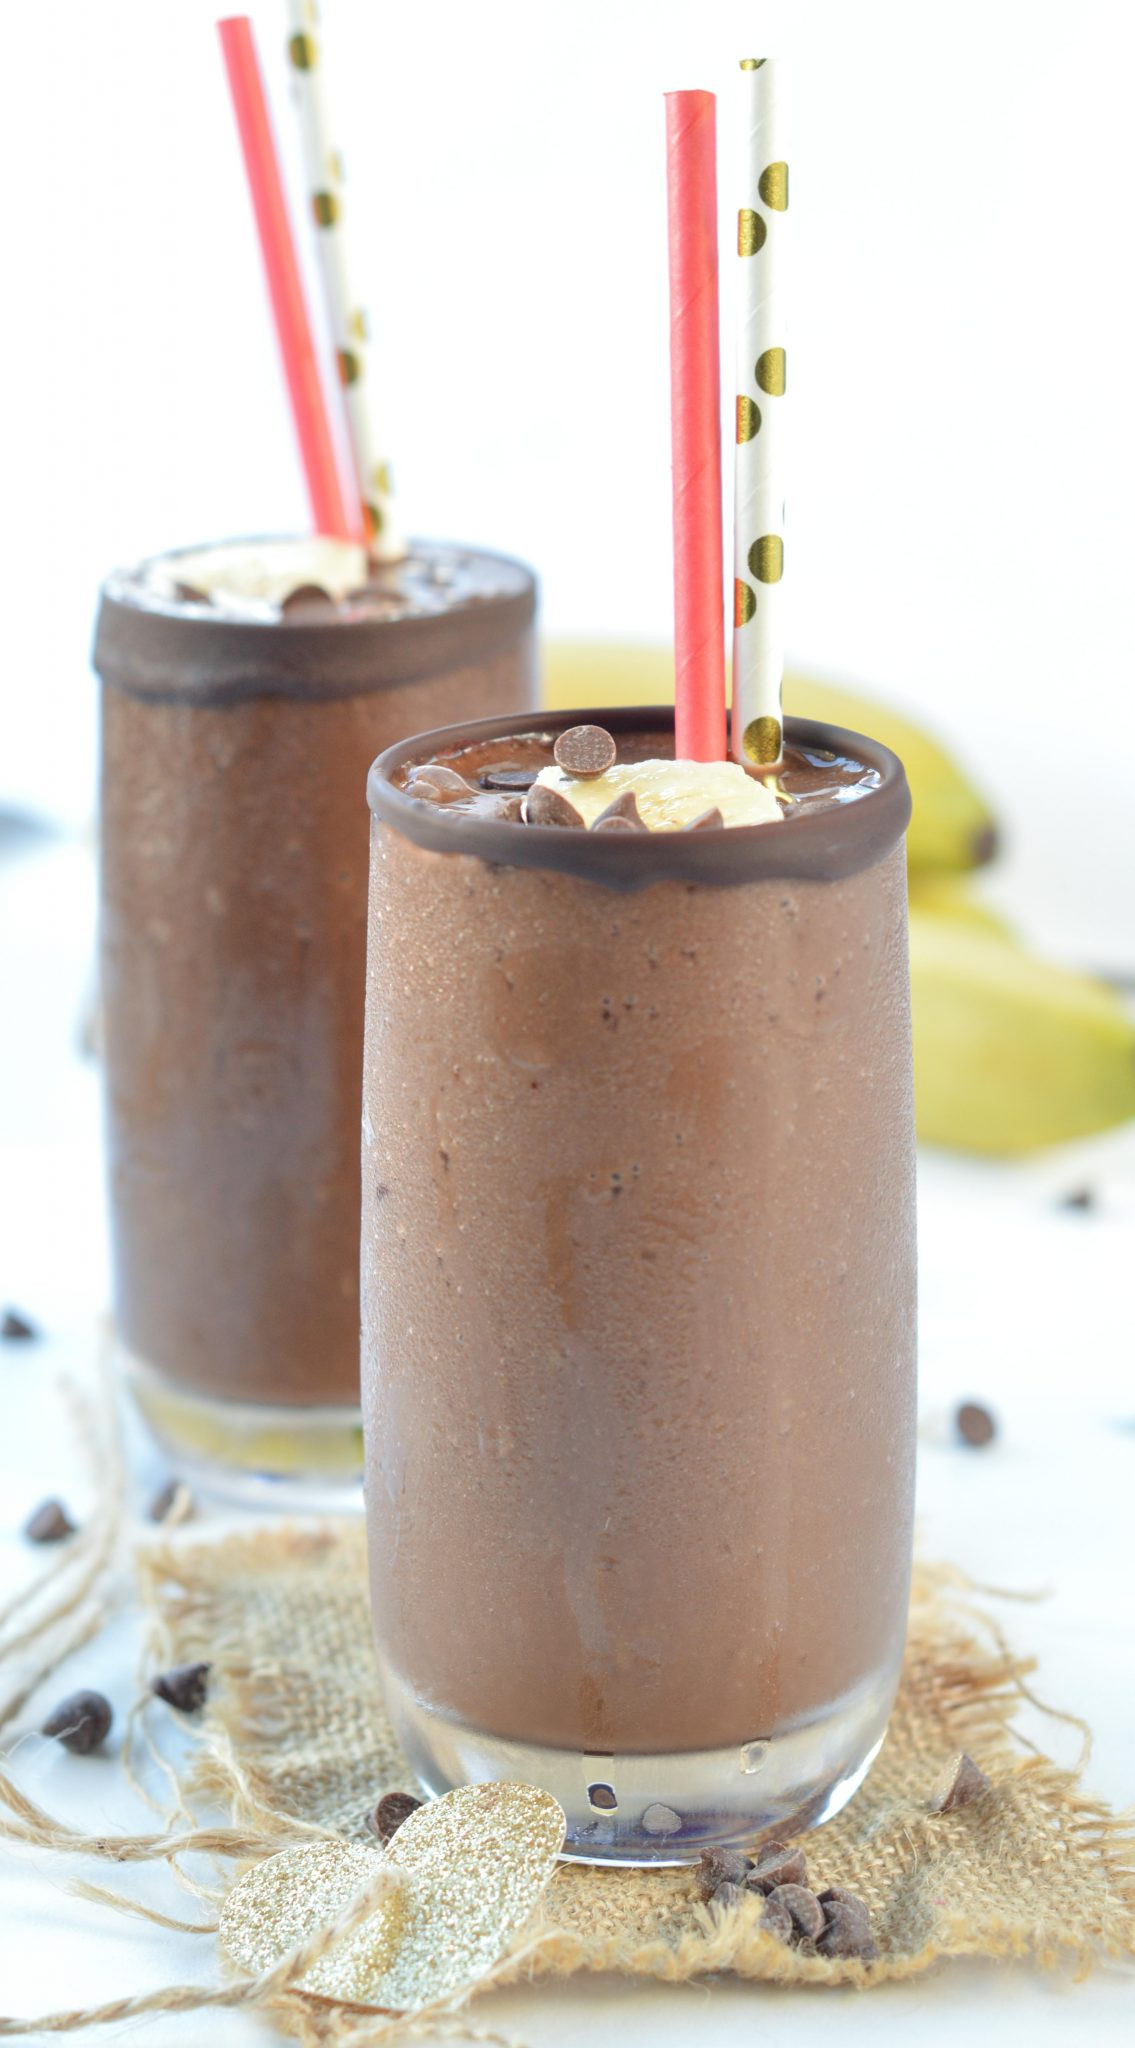 Chocolate Smoothies Healthy
 Healthy Chocolate banana smoothie